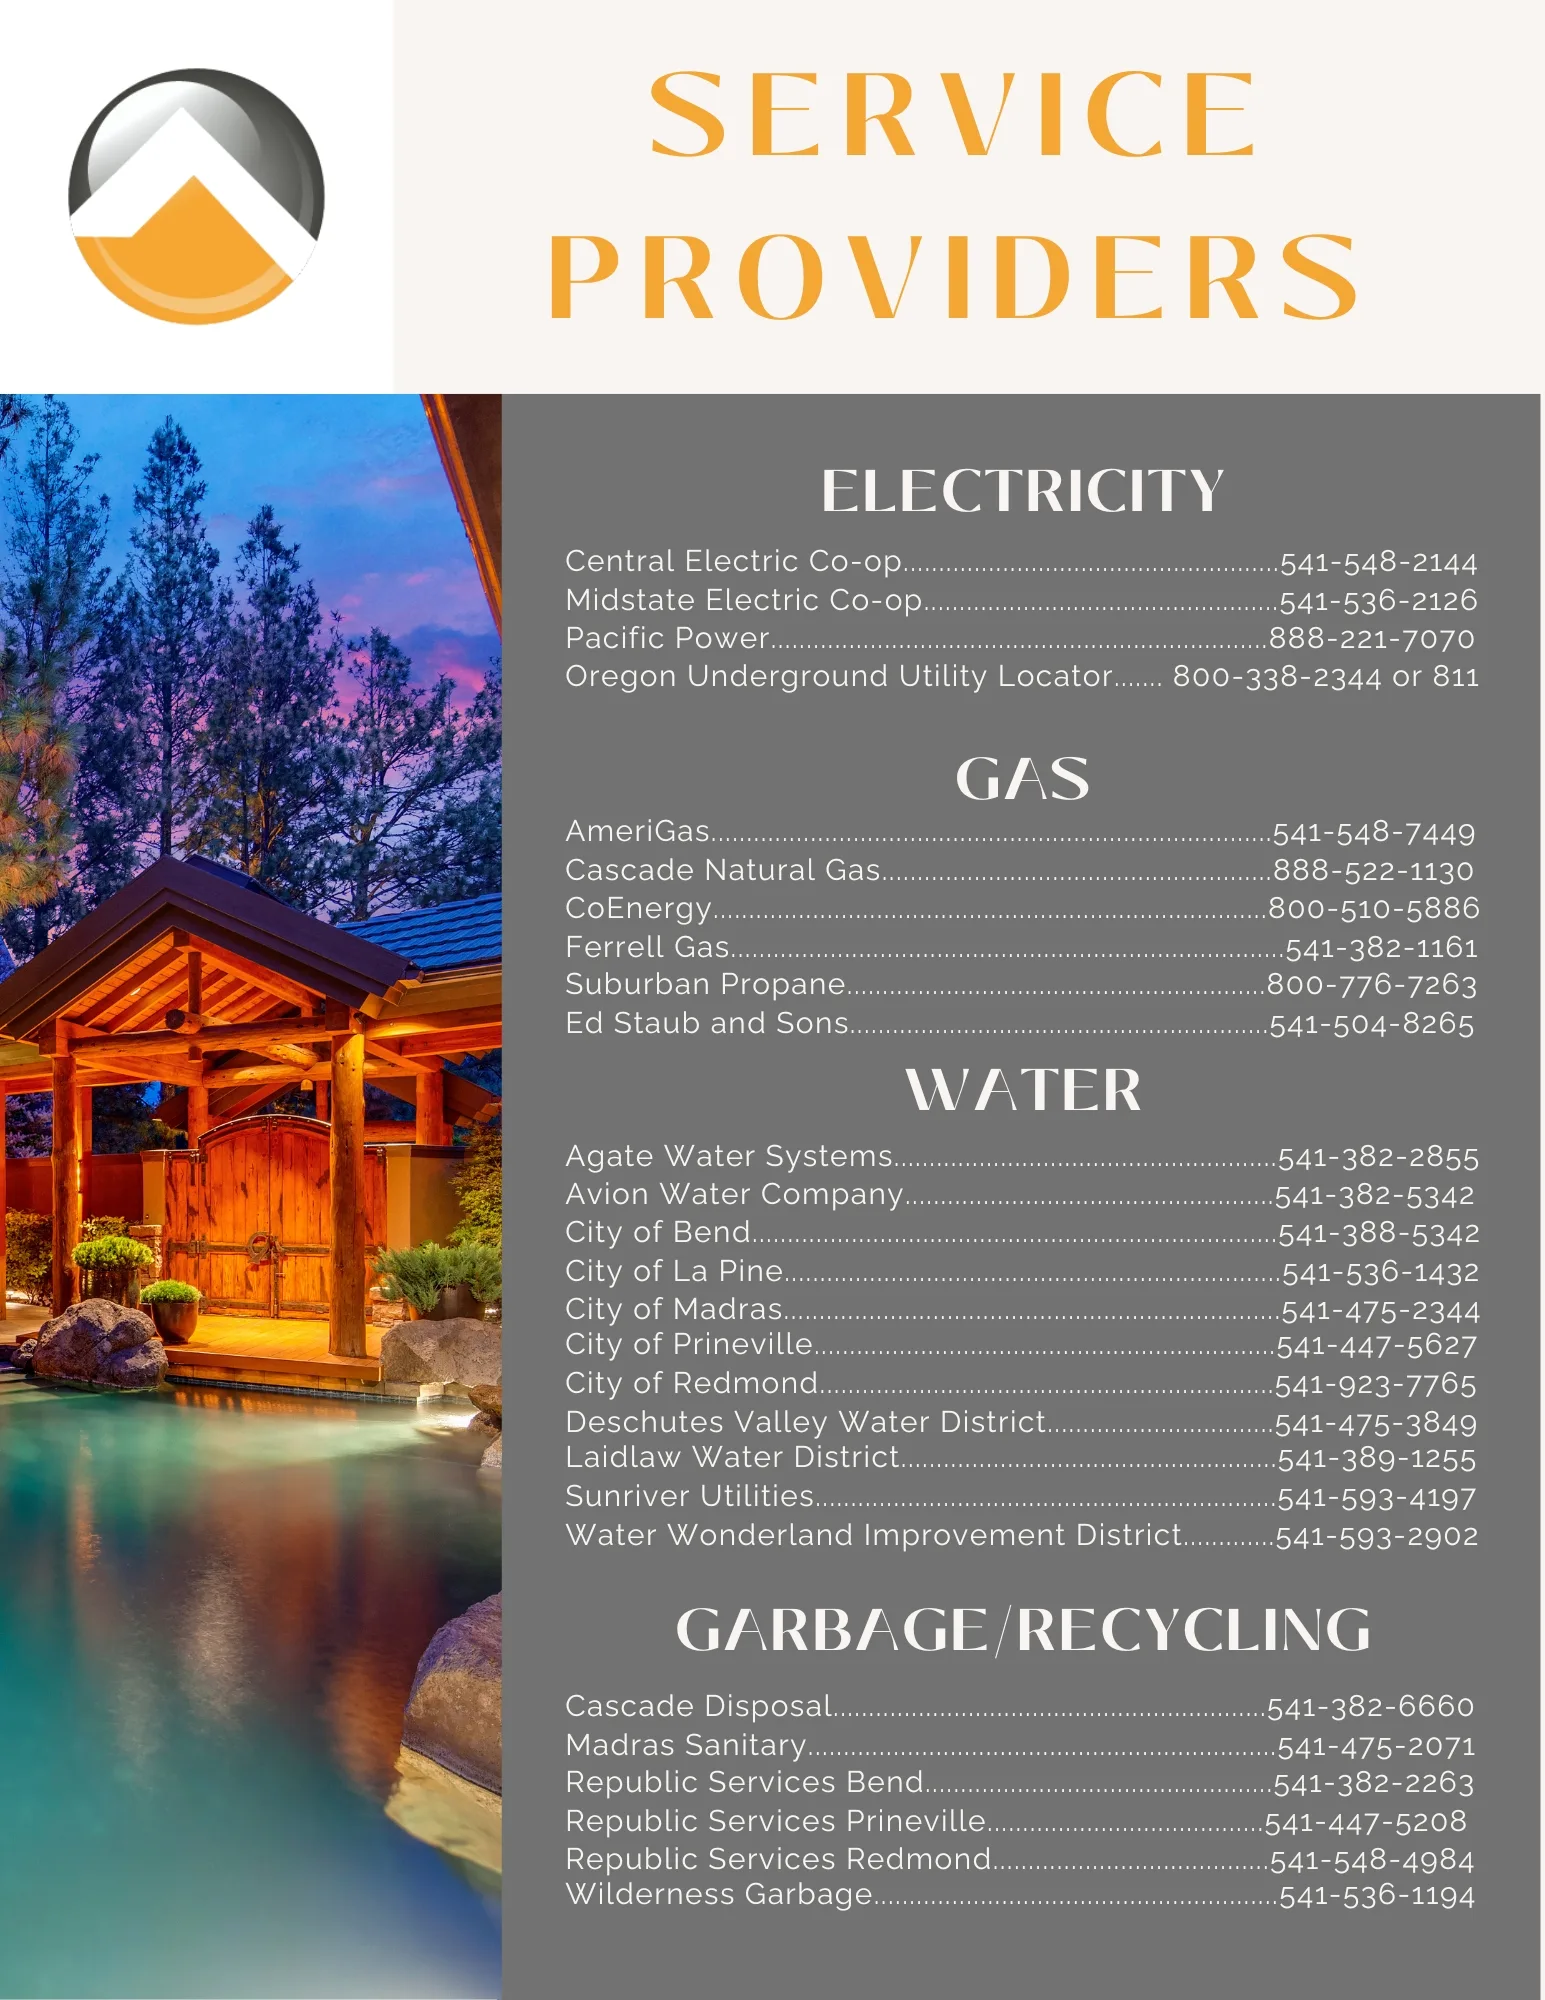 Central Oregon Utility Company Contact Information